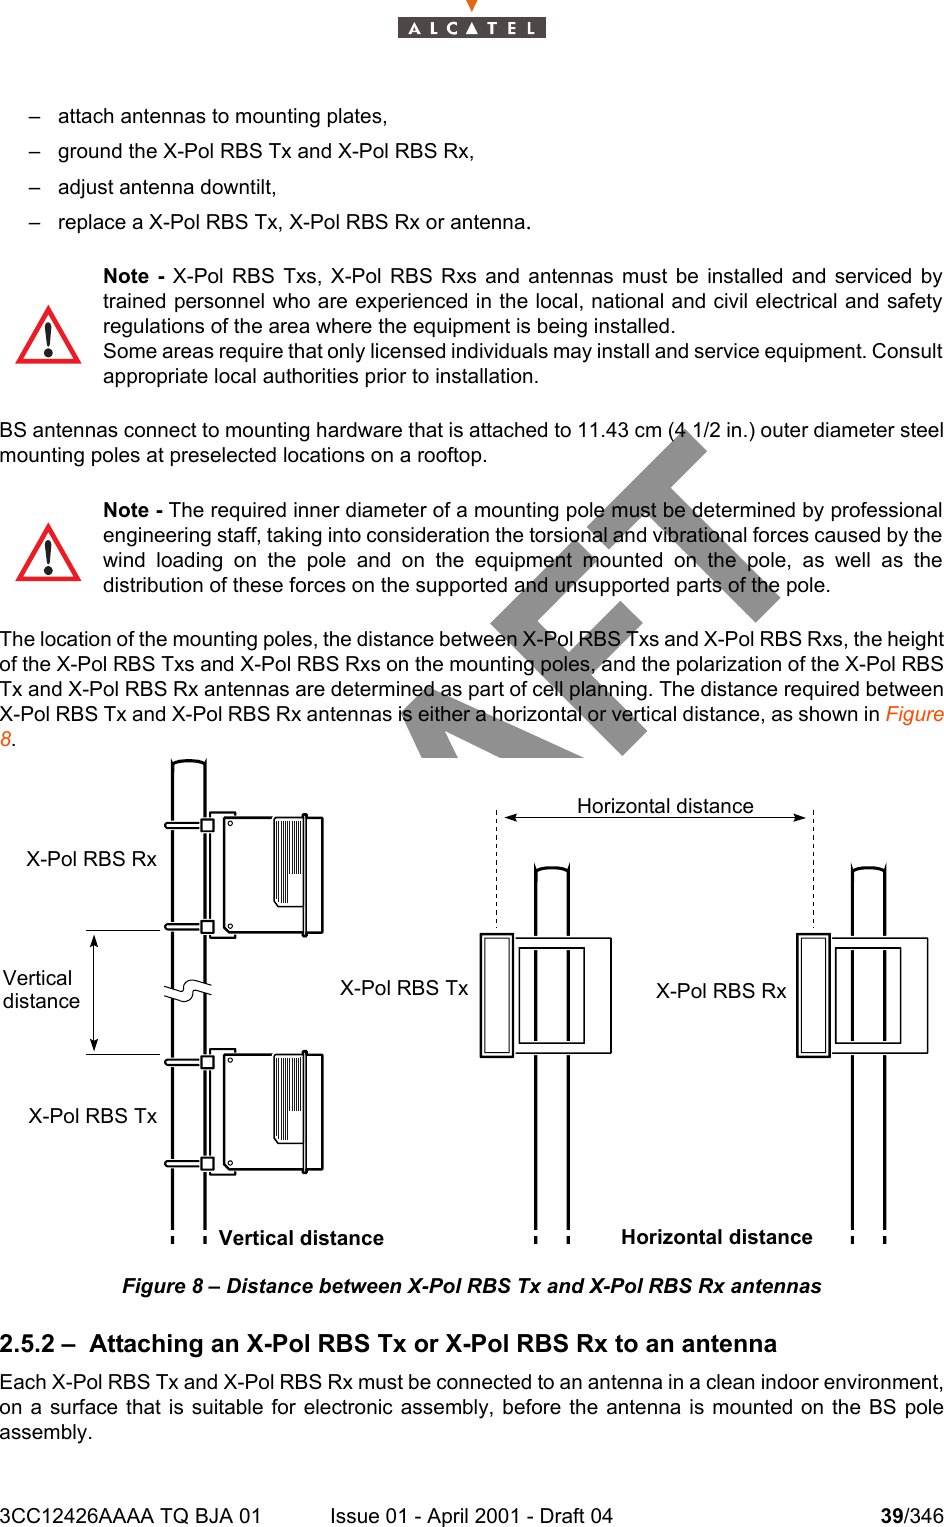 3CC12426AAAA TQ BJA 01 Issue 01 - April 2001 - Draft 04 39/346104– attach antennas to mounting plates,– ground the X-Pol RBS Tx and X-Pol RBS Rx,– adjust antenna downtilt,– replace a X-Pol RBS Tx, X-Pol RBS Rx or antenna.BS antennas connect to mounting hardware that is attached to 11.43 cm (4 1/2 in.) outer diameter steelmounting poles at preselected locations on a rooftop. The location of the mounting poles, the distance between X-Pol RBS Txs and X-Pol RBS Rxs, the heightof the X-Pol RBS Txs and X-Pol RBS Rxs on the mounting poles, and the polarization of the X-Pol RBSTx and X-Pol RBS Rx antennas are determined as part of cell planning. The distance required betweenX-Pol RBS Tx and X-Pol RBS Rx antennas is either a horizontal or vertical distance, as shown in Figure8.Figure 8 – Distance between X-Pol RBS Tx and X-Pol RBS Rx antennas2.5.2 – Attaching an X-Pol RBS Tx or X-Pol RBS Rx to an antennaEach X-Pol RBS Tx and X-Pol RBS Rx must be connected to an antenna in a clean indoor environment,on a surface that is suitable for electronic assembly, before the antenna is mounted on the BS poleassembly. Note - X-Pol RBS Txs, X-Pol RBS Rxs and antennas must be installed and serviced bytrained personnel who are experienced in the local, national and civil electrical and safetyregulations of the area where the equipment is being installed.Some areas require that only licensed individuals may install and service equipment. Consultappropriate local authorities prior to installation.Note - The required inner diameter of a mounting pole must be determined by professionalengineering staff, taking into consideration the torsional and vibrational forces caused by thewind loading on the pole and on the equipment mounted on the pole, as well as thedistribution of these forces on the supported and unsupported parts of the pole.X-Pol RBS TxX-Pol RBS TxX-Pol RBS RxX-Pol RBS RxHorizontal distanceHorizontal distanceVertical distanceVerticaldistance